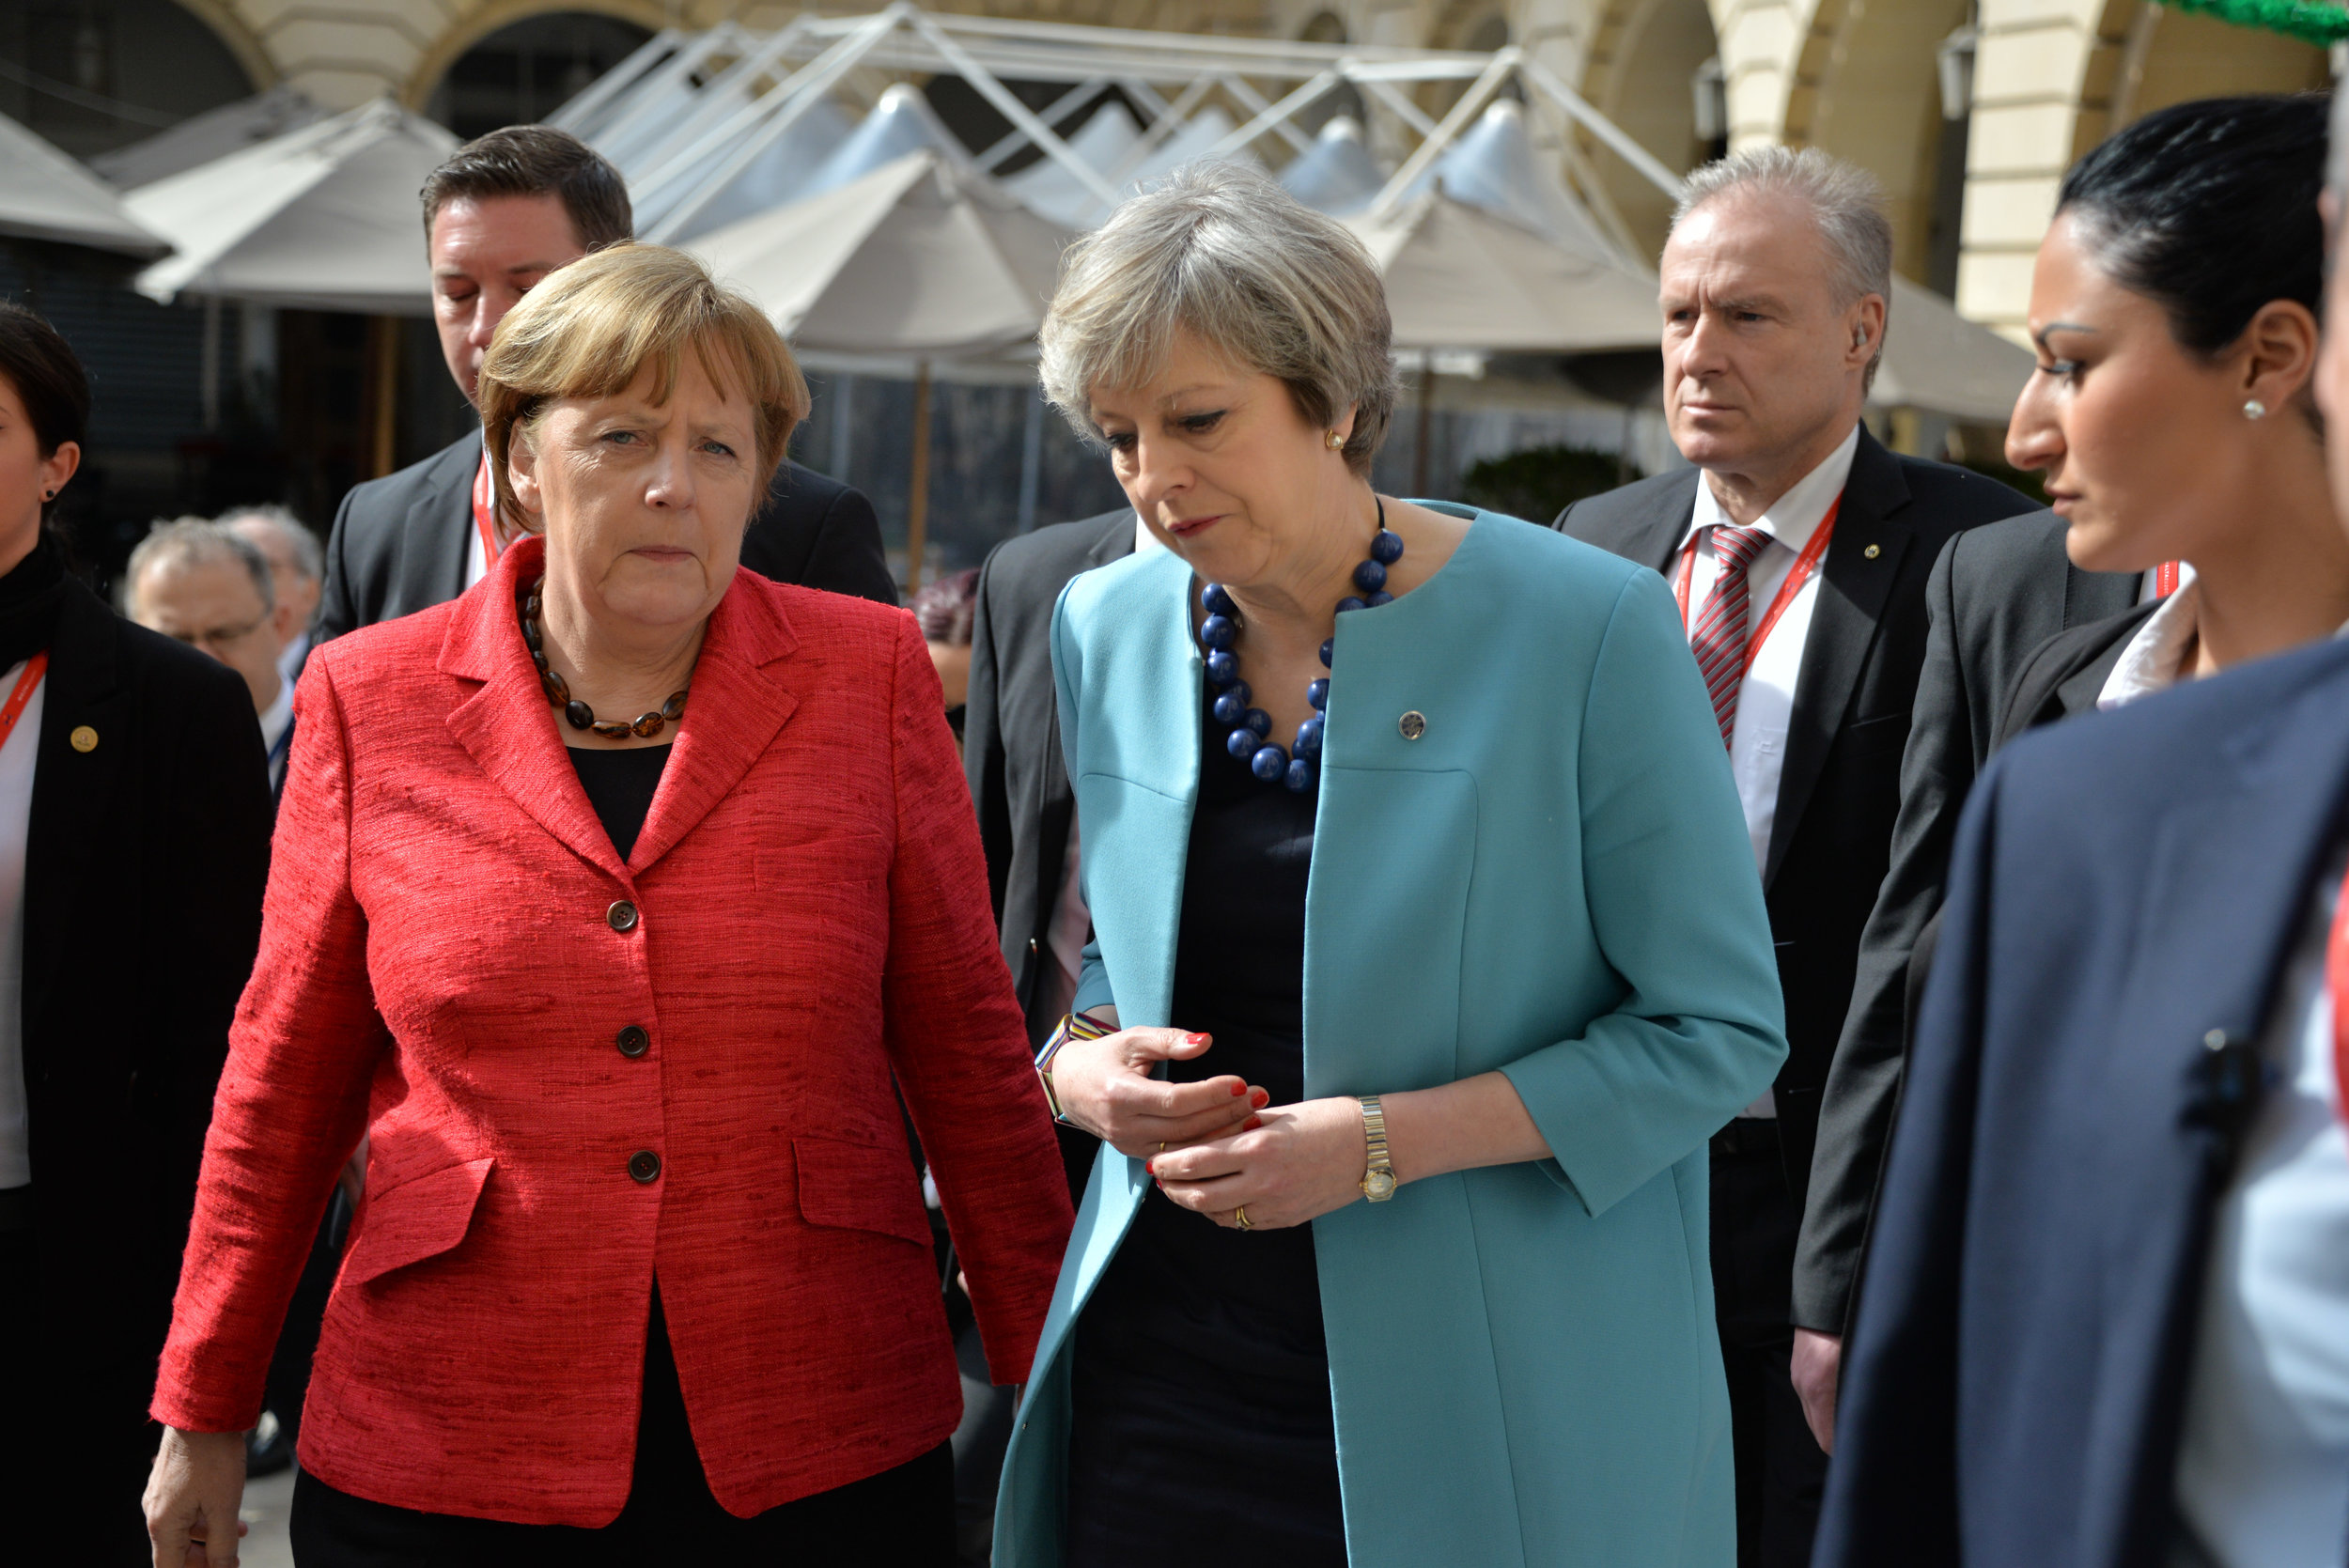  German Chancellor Angela Merkel (Left) and British Prime Minister Theresa May (Right) at a summit of the European Council in Valletta, Malta, Friday, Feb. 3, 2017. A continued flow of migrants from the Middle East and Africa is pressuring the Europe